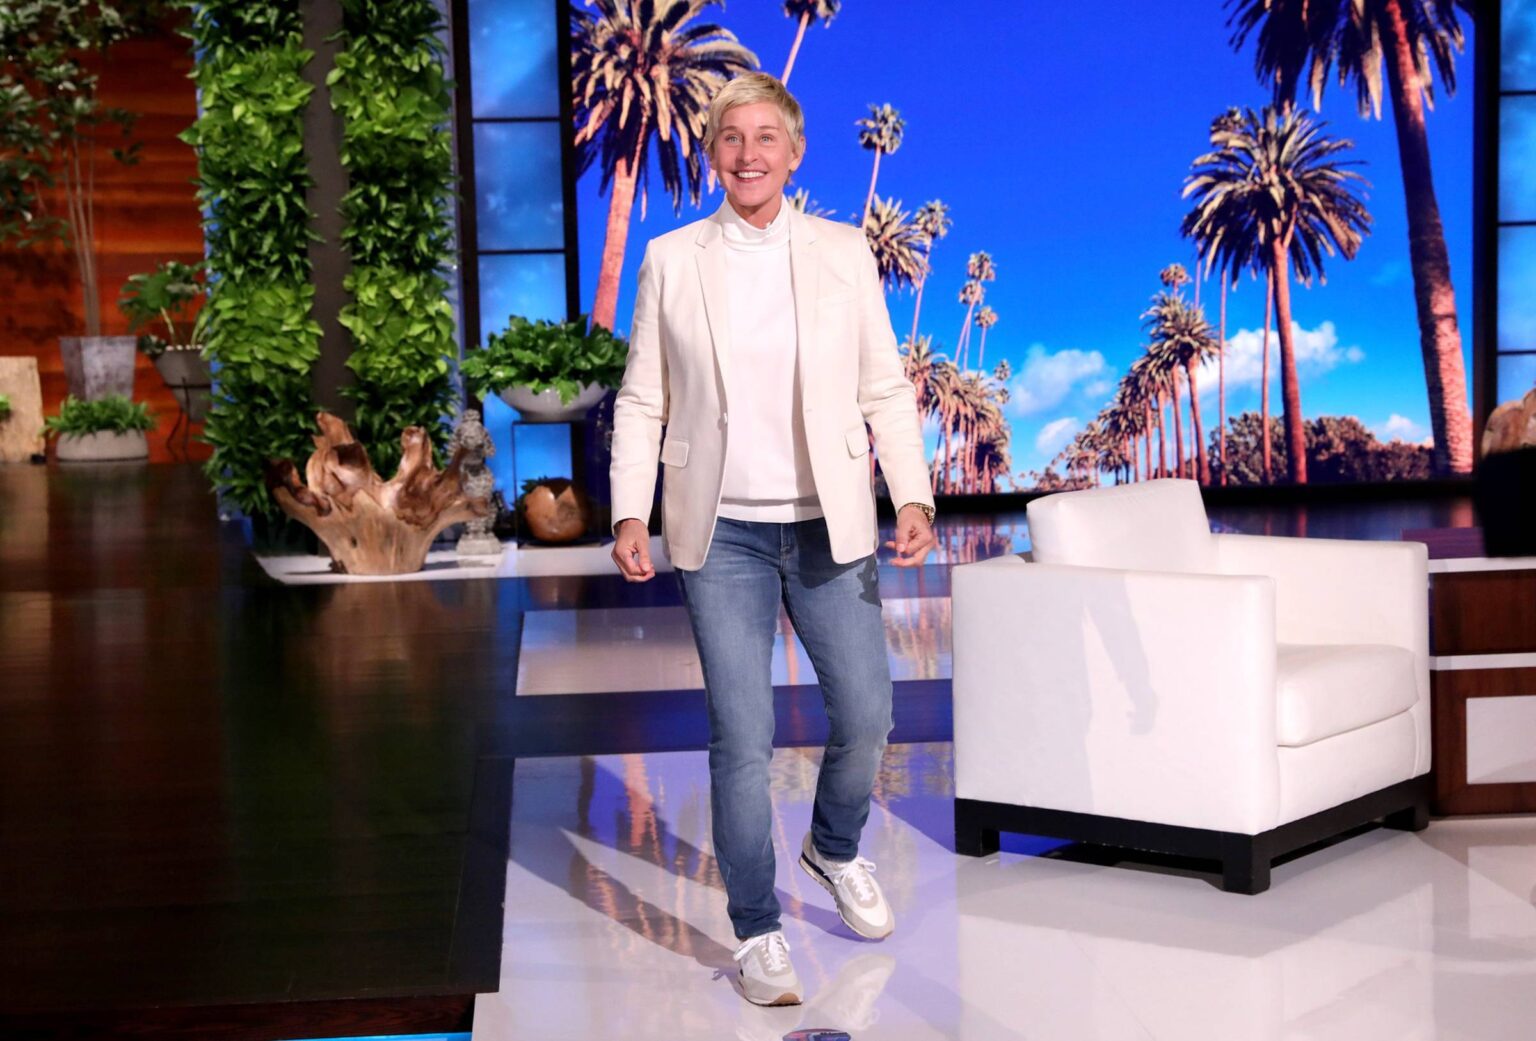 Is Ellen DeGeneres so mean she forces people to be nice to her? Guests on 'The Ellen Show' are saying they were required to shower Ellen with praise.